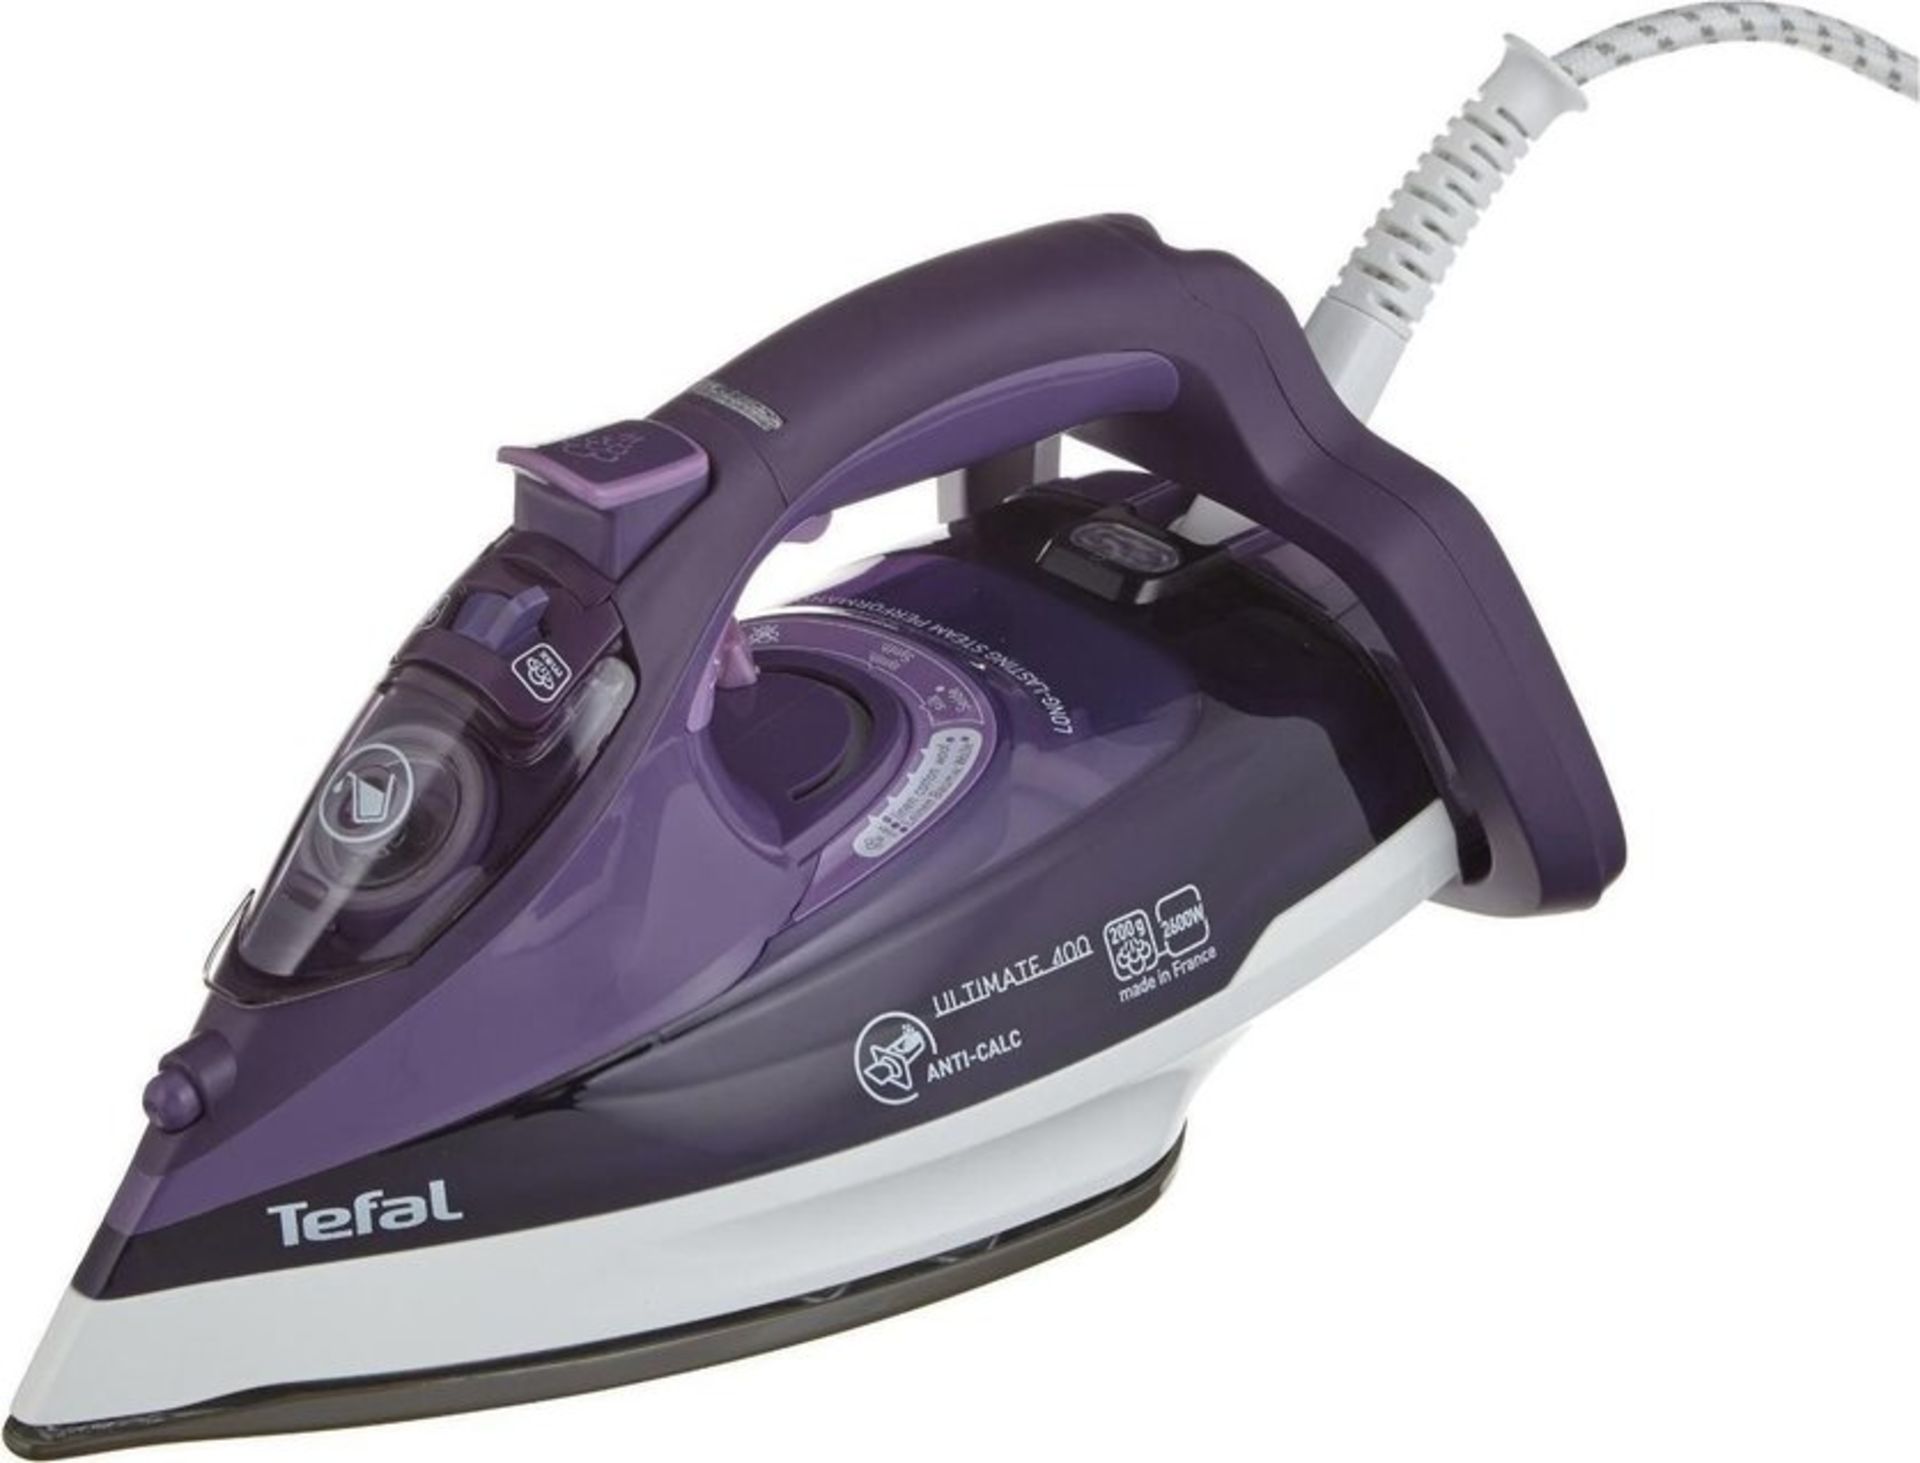 V Brand New Tefal Ultimate Anti Calc 400 2600W Turbo Steam Iron - Glide Protect - Security On/